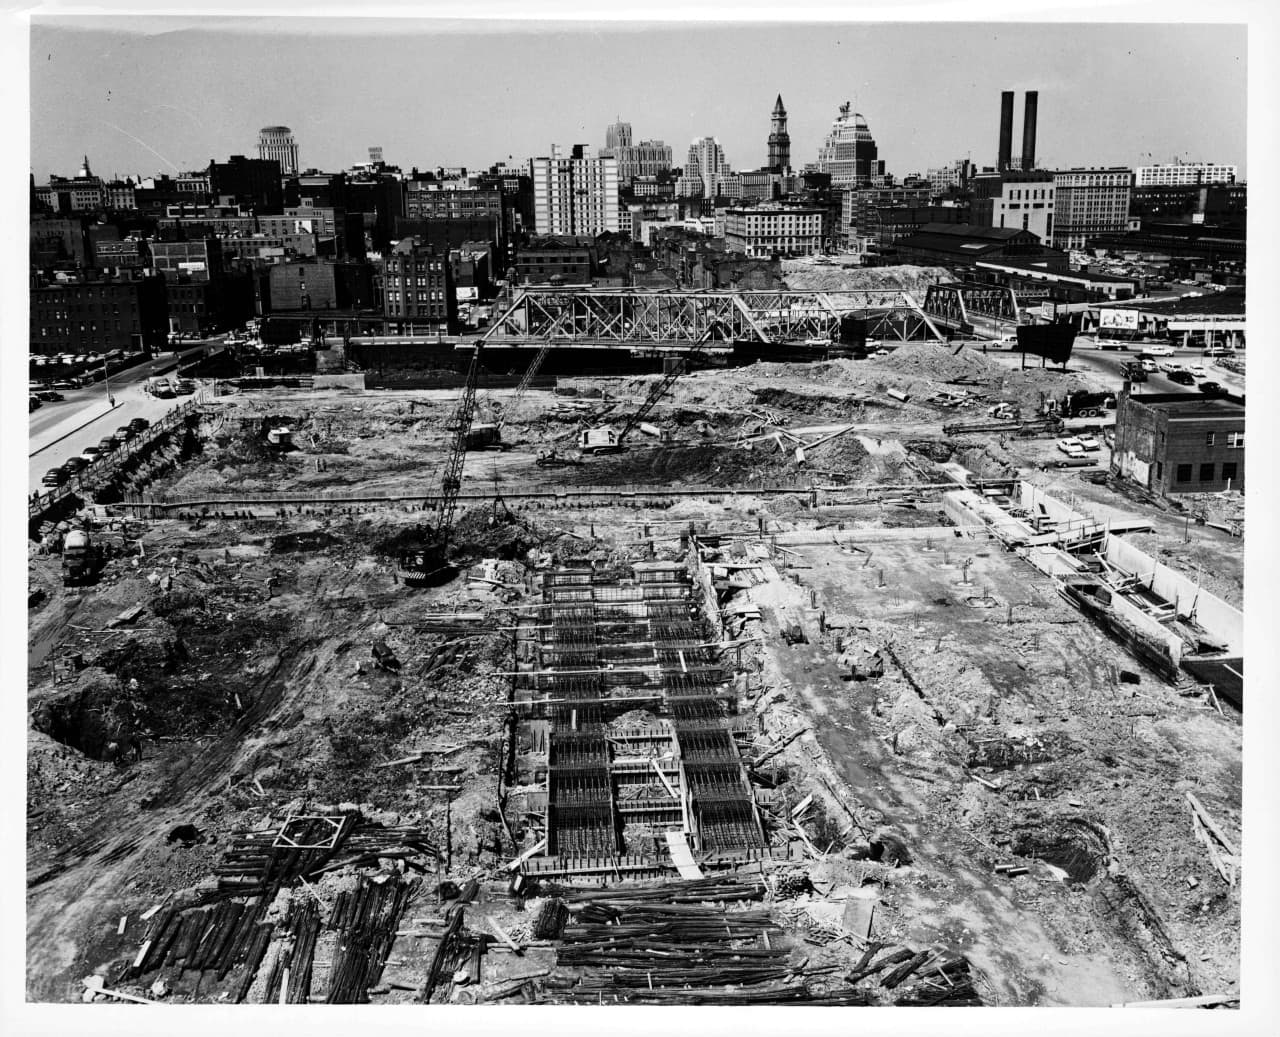 The 1955 razing of the New York streets in the South End. With names like Oswego, Rochester, Troy, Oneida and the sole survivor, Albany, the New York streets were a crowded, diverse and vibrant section of the South End. As the first urban renewal project in Boston, the demolition made way for various civic and commercial enterprises. Displacing more than 800 families from their homes and shuttering businesses, the wholesale leveling of the neighborhood predated the demolition of the West End by several years. 1958. (Courtesy City of Boston)